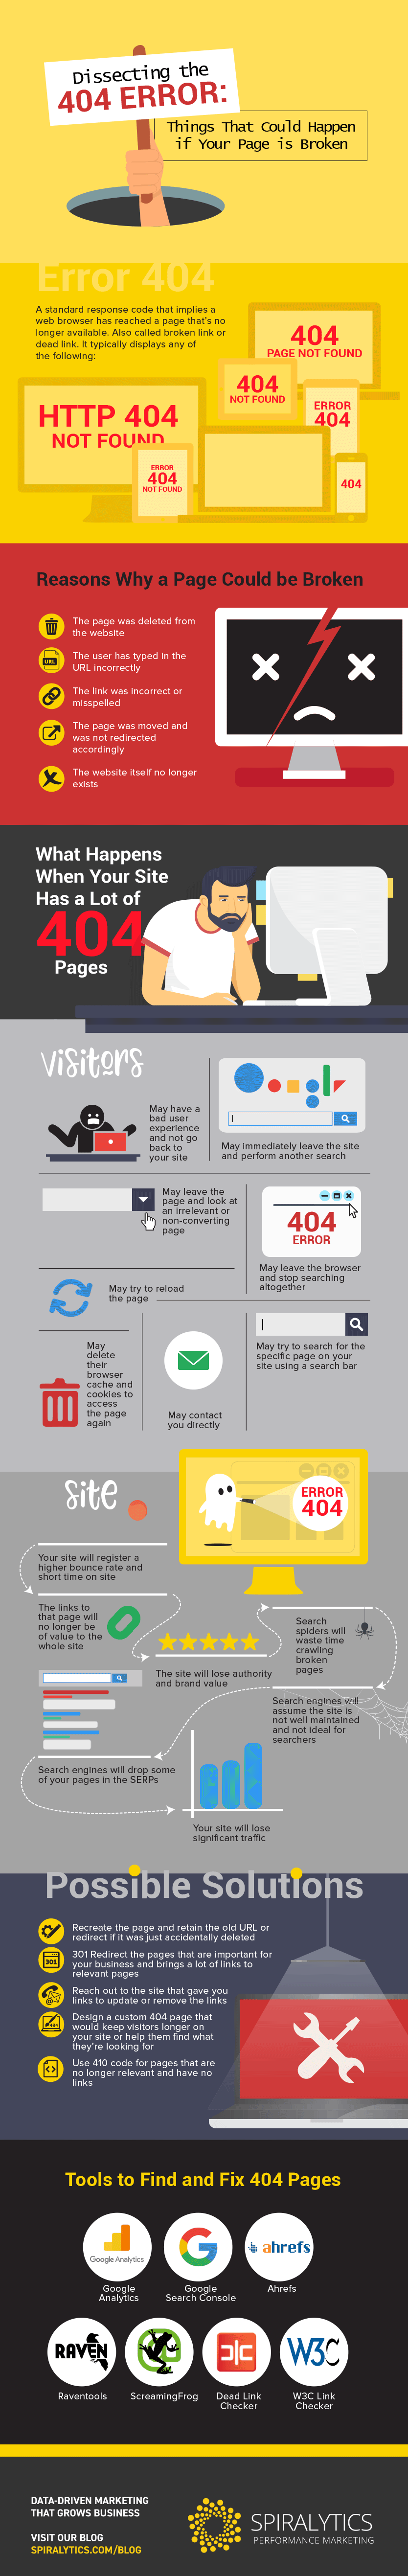 Dissecting-the-404-Error-Things-That-Could-Happen-if-Your-Page-is-Broken-GIFOGRAPHIC